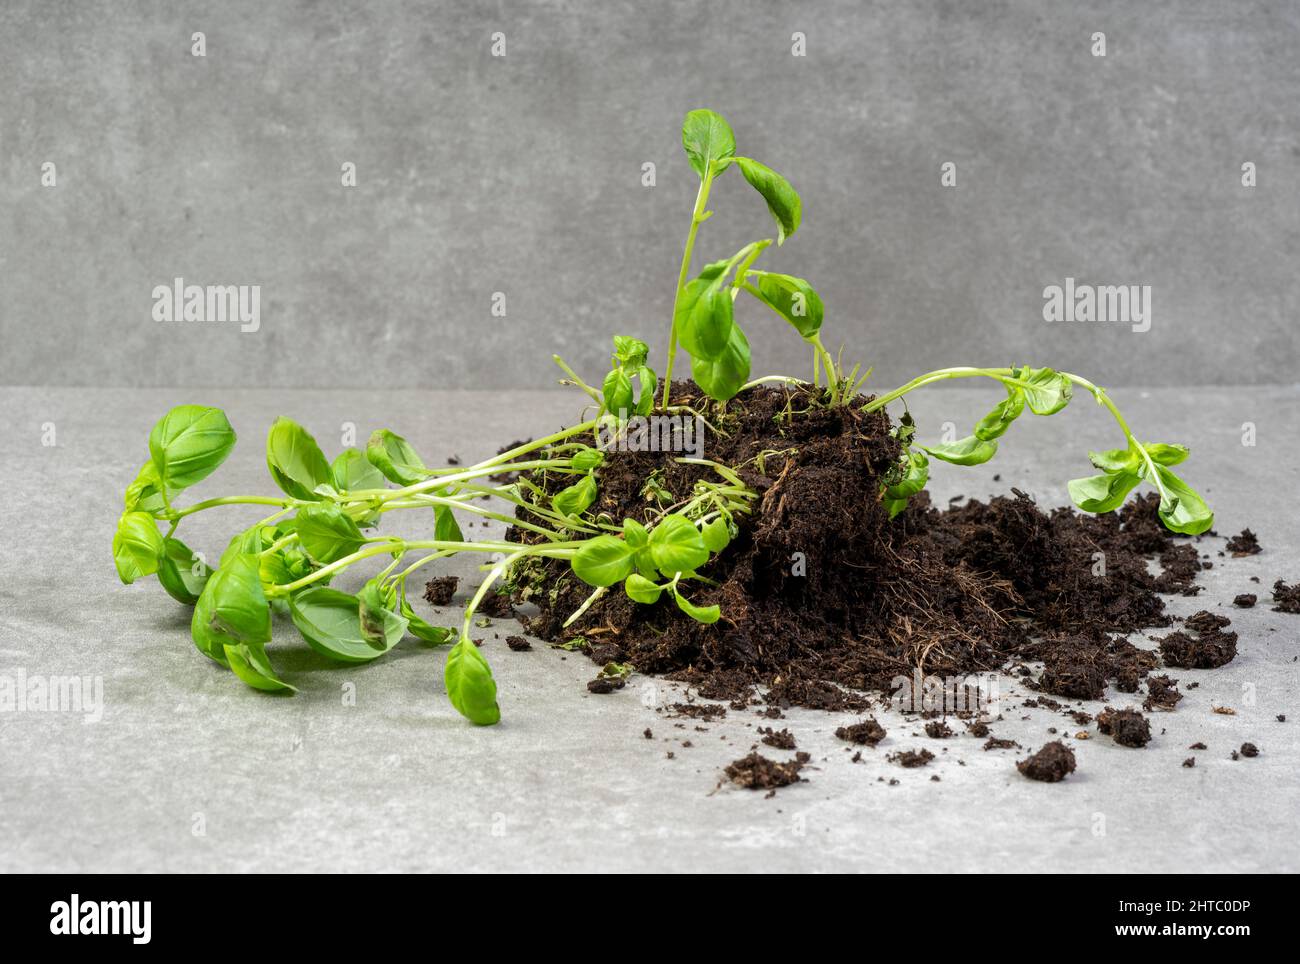 Basil plant with potting soil fallen on grey marbled ground Stock Photo